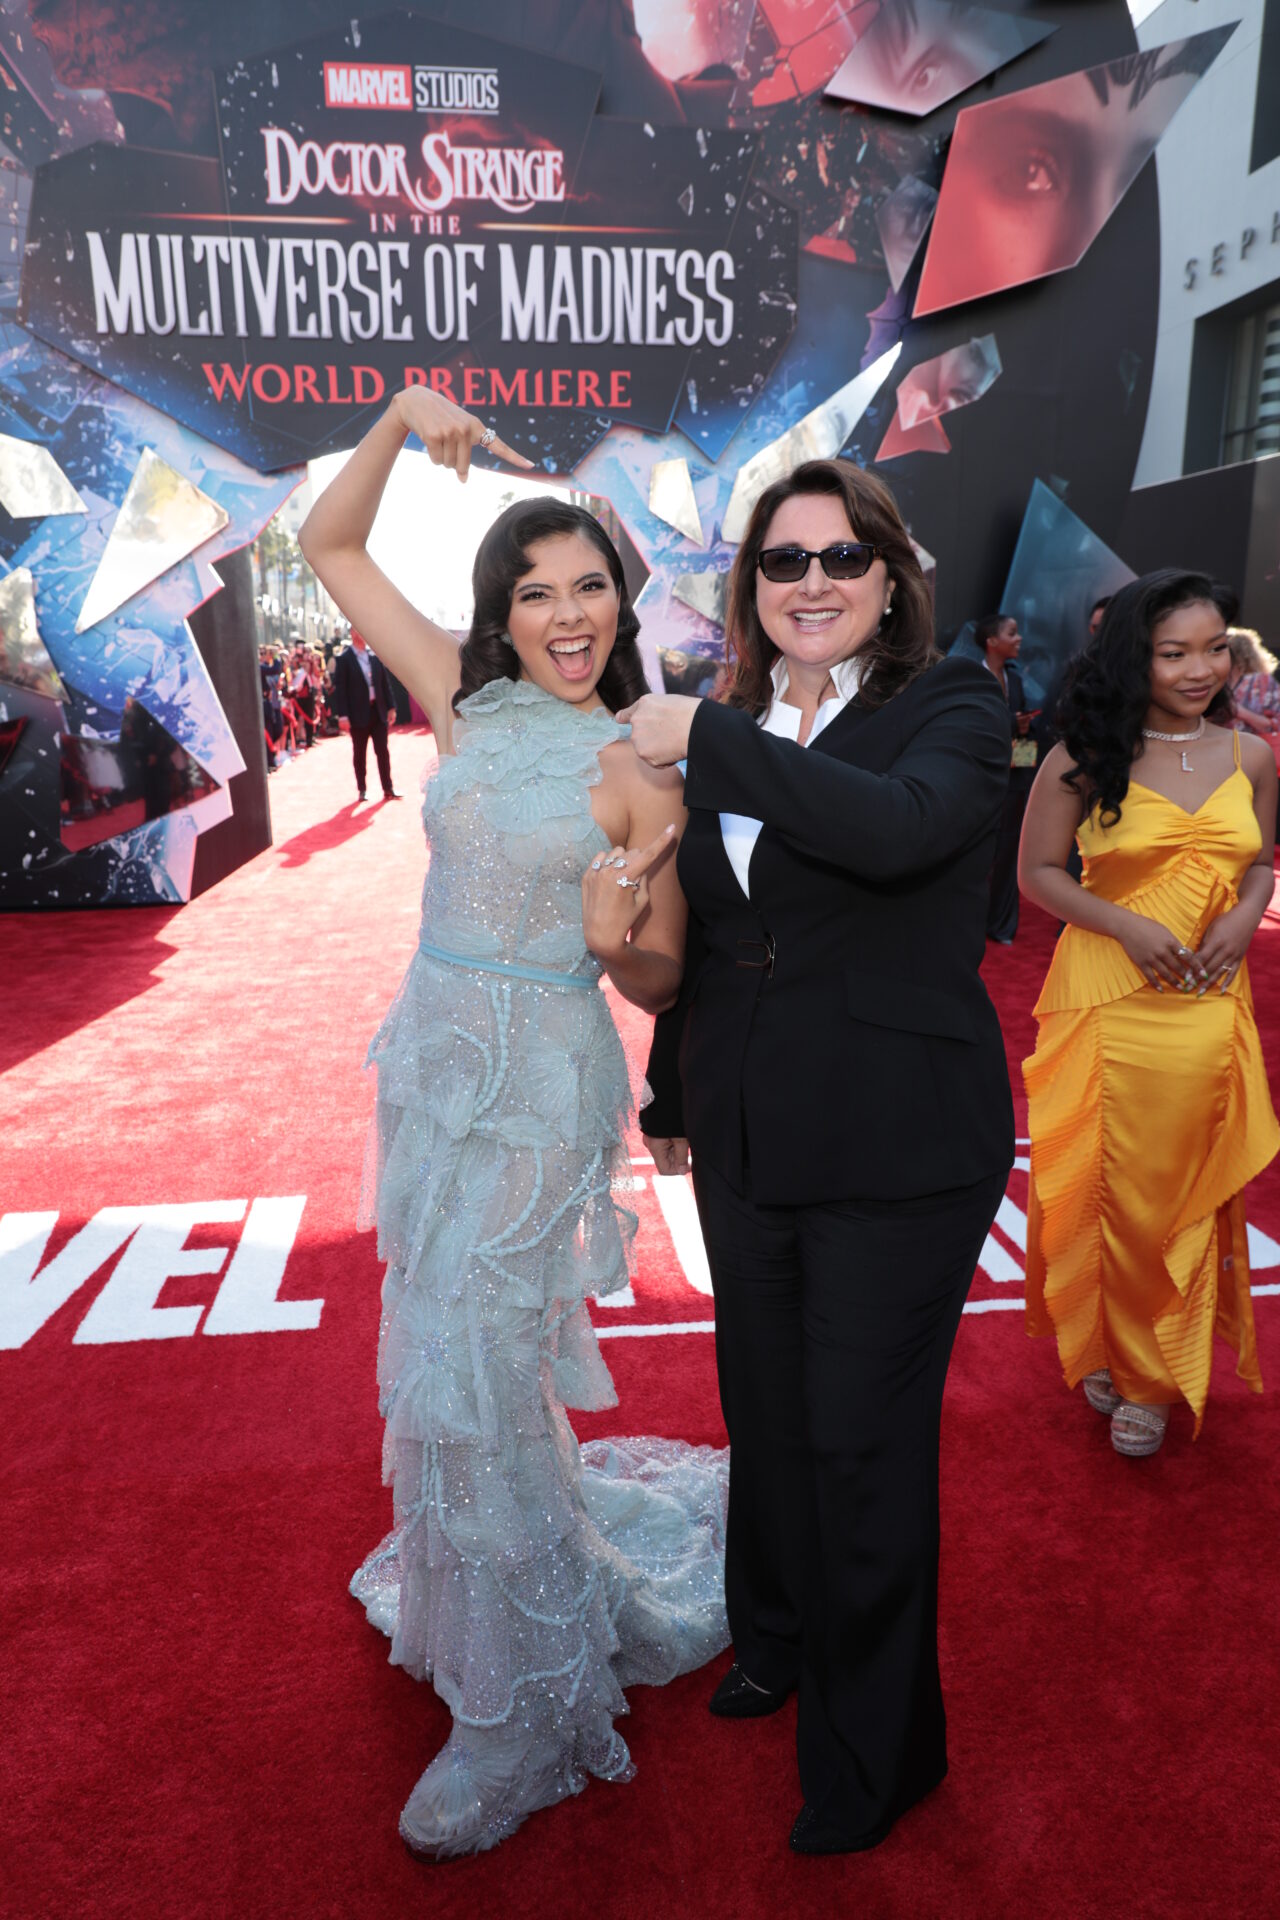 Xochitl Gomez and Executive Producer Victoria Alonso attend the Doctor Strange in the Multiverse of Madness World Premiere at the Dolby Theatre in Hollywood, CA on Monday, May 2, 2022. (photo: Alex J. Berliner/ABImages)